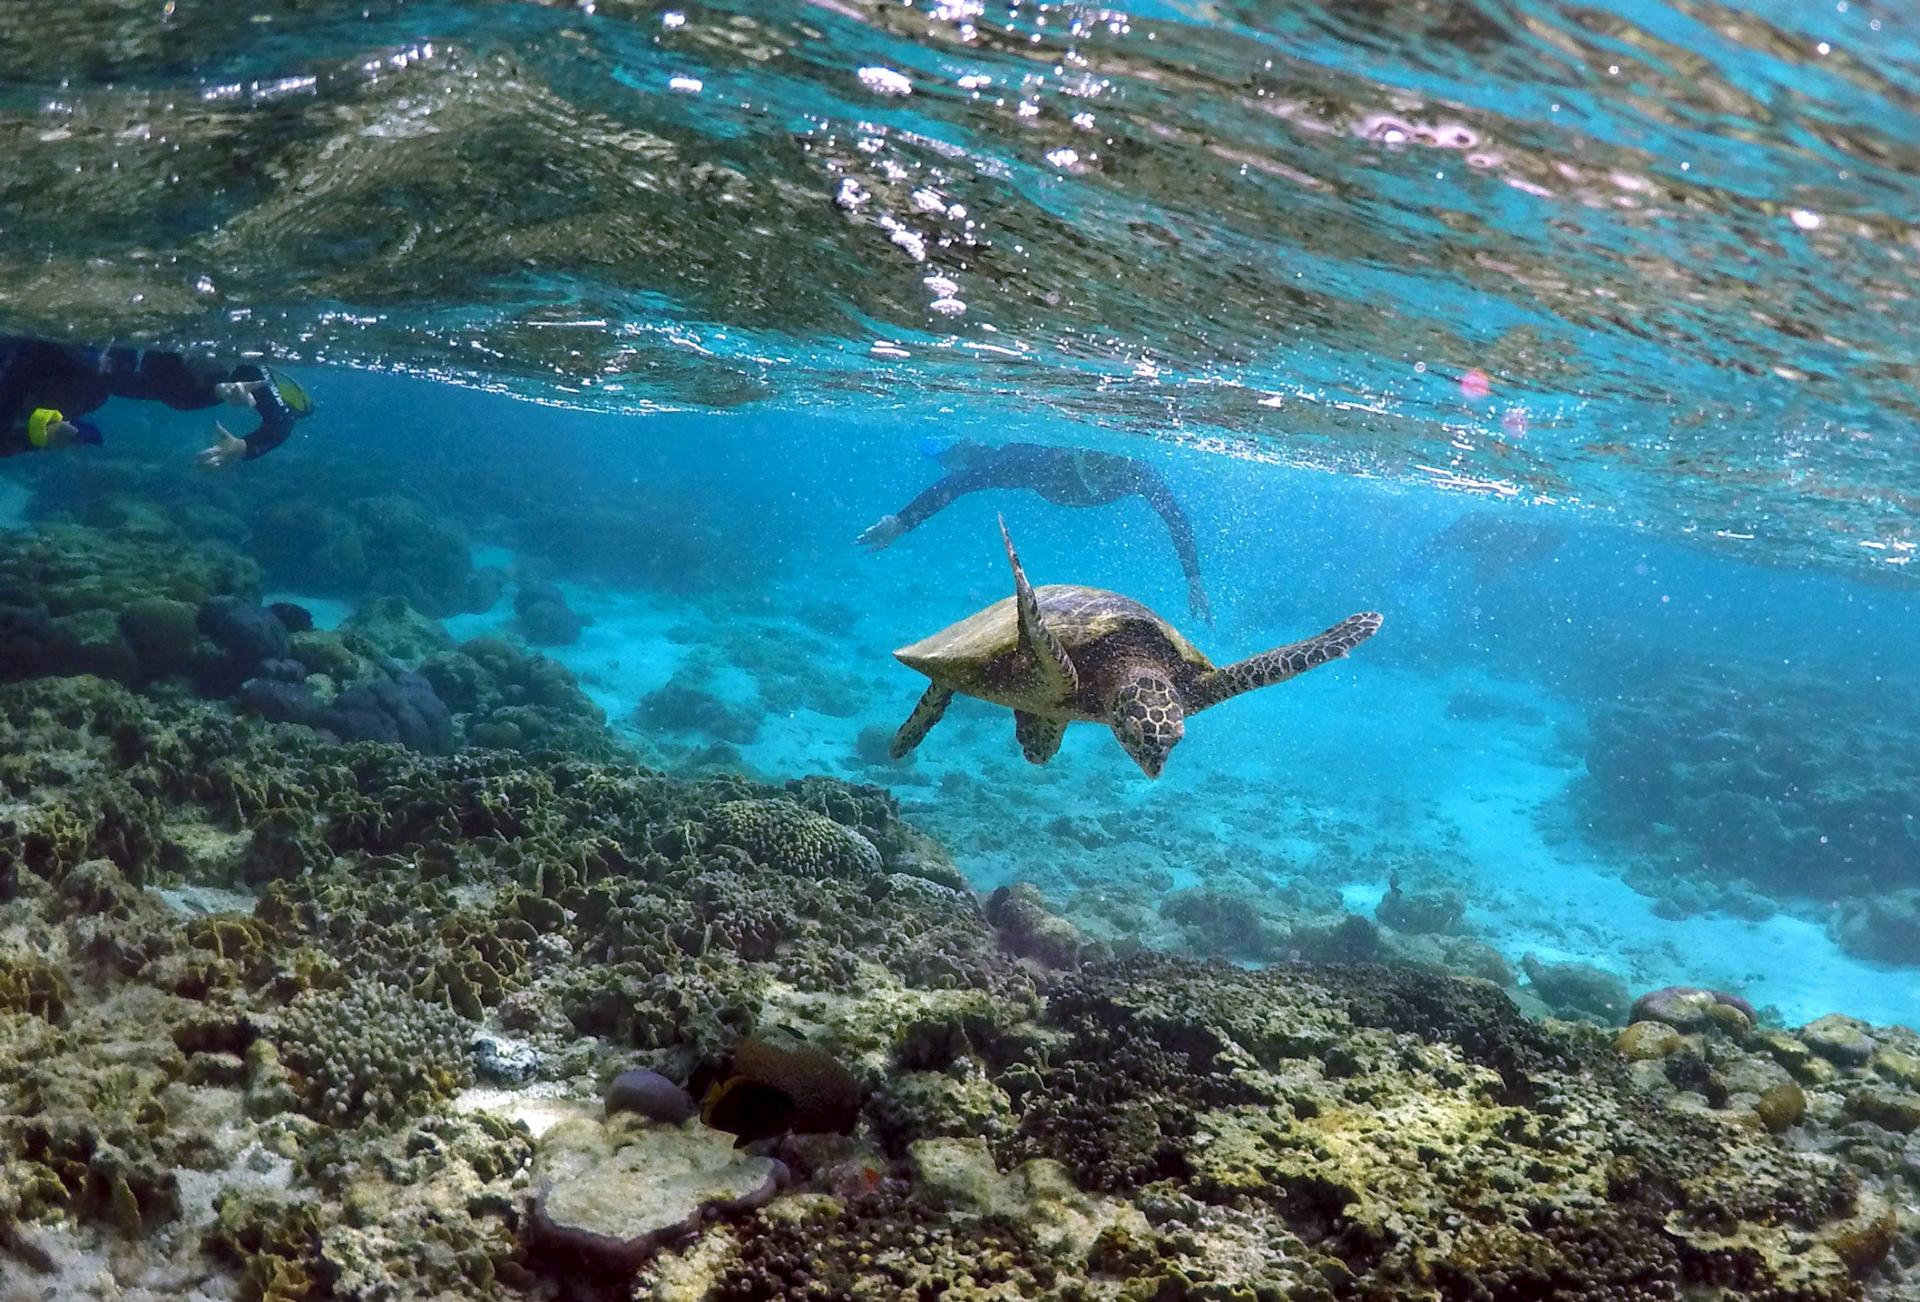 Tourists snorkel near a sea turtle as it looks for food amongst the coral.